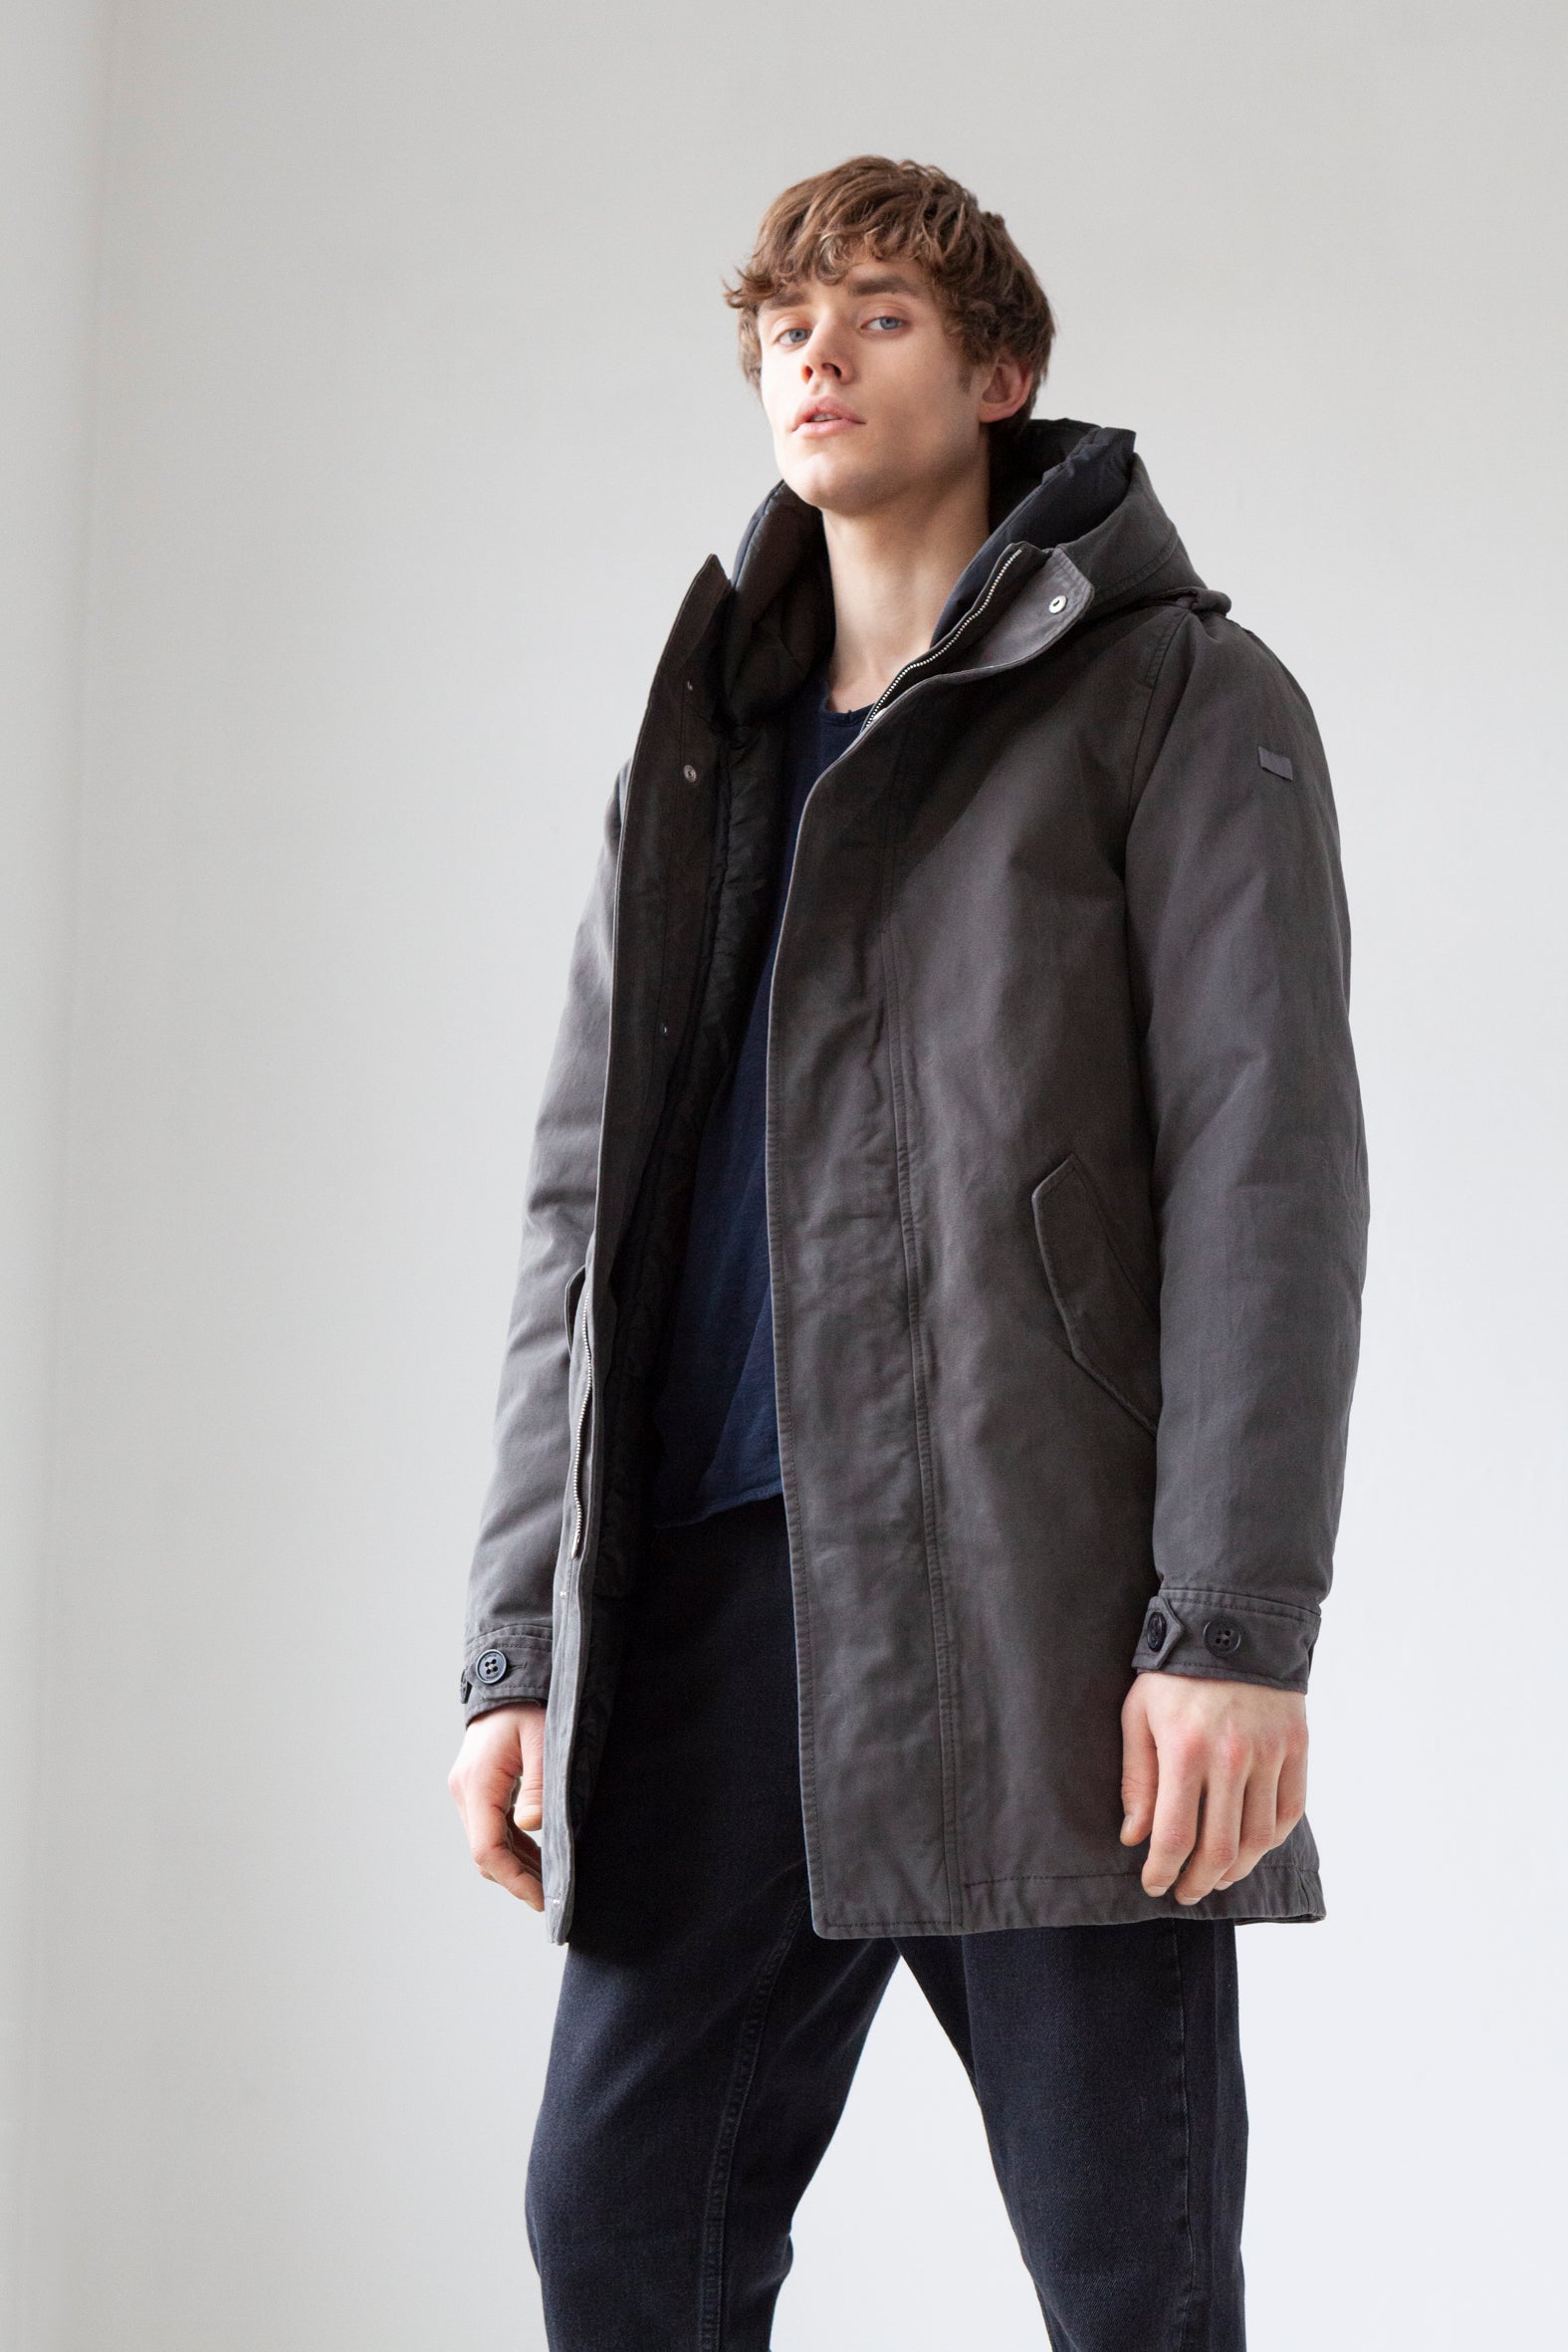 hooded Lempelius cotton parka with a straight fit 